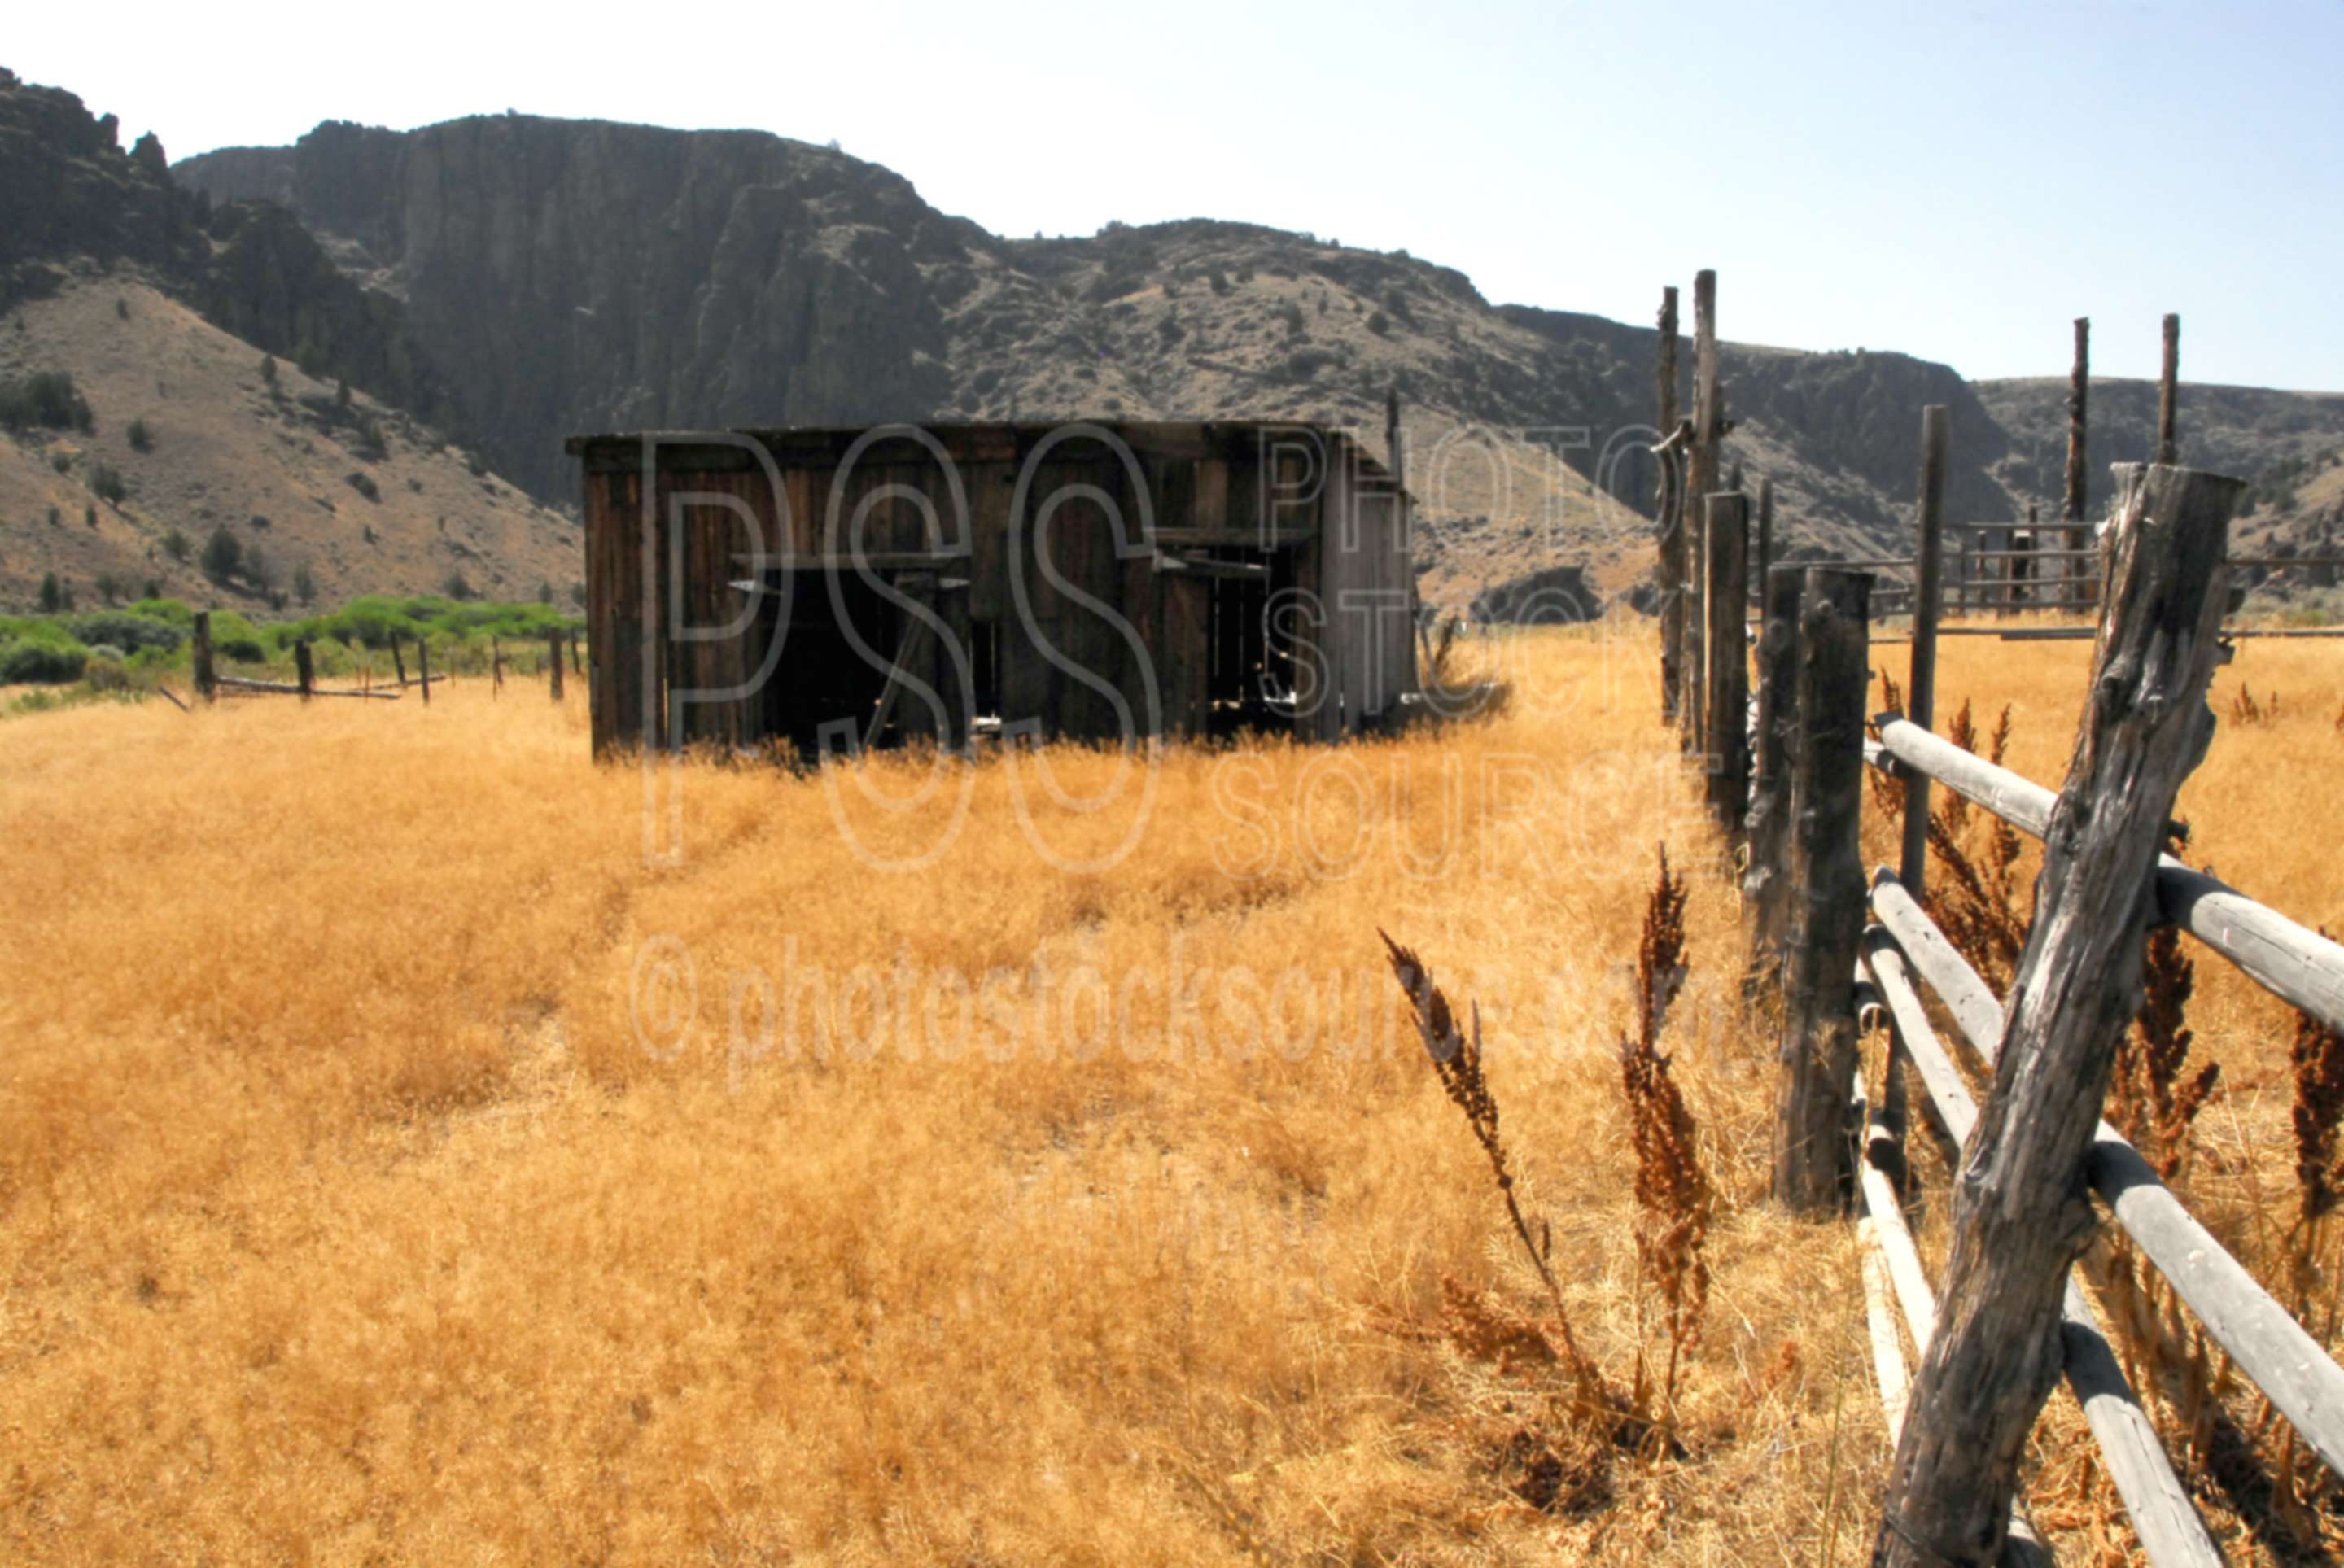 Three Forks Corral,stable,corral,horses,fence,rail fence,americana,old west,wood,barn